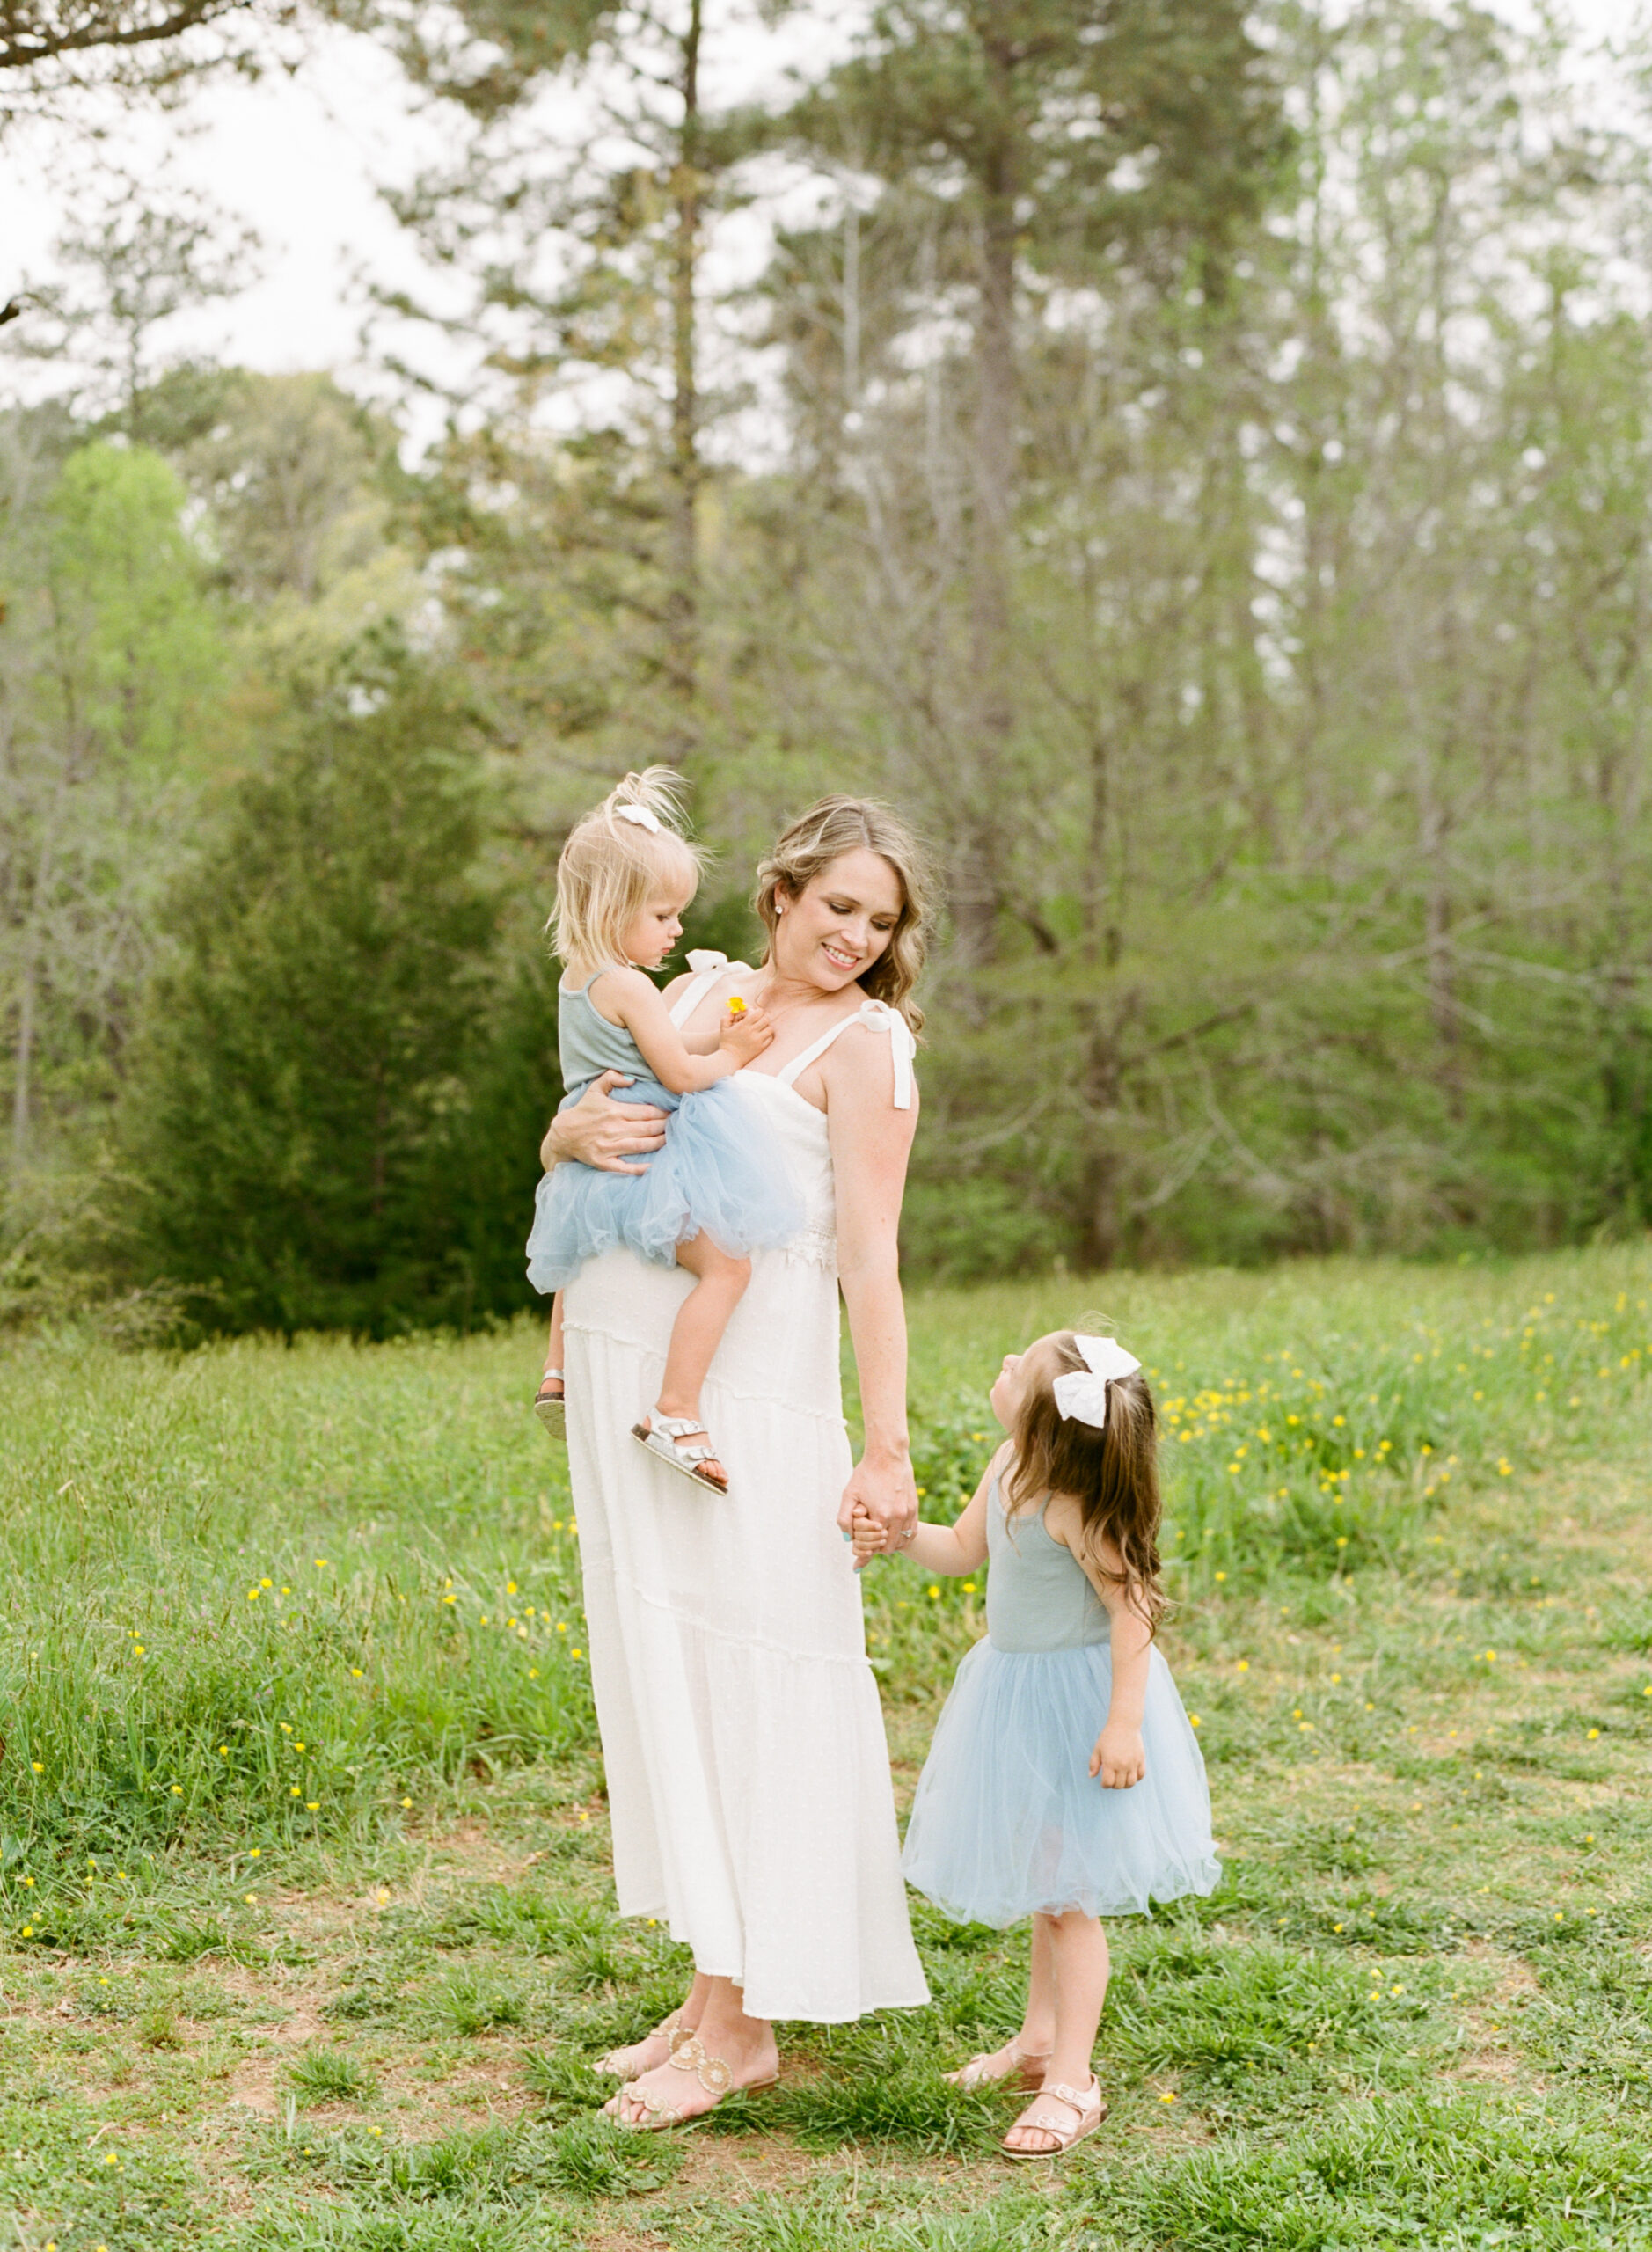 Pregnant mom plays with her daughters in a field. Photographed during Maternity Pictures Raleigh NC by A.J. Dunlap Photography.